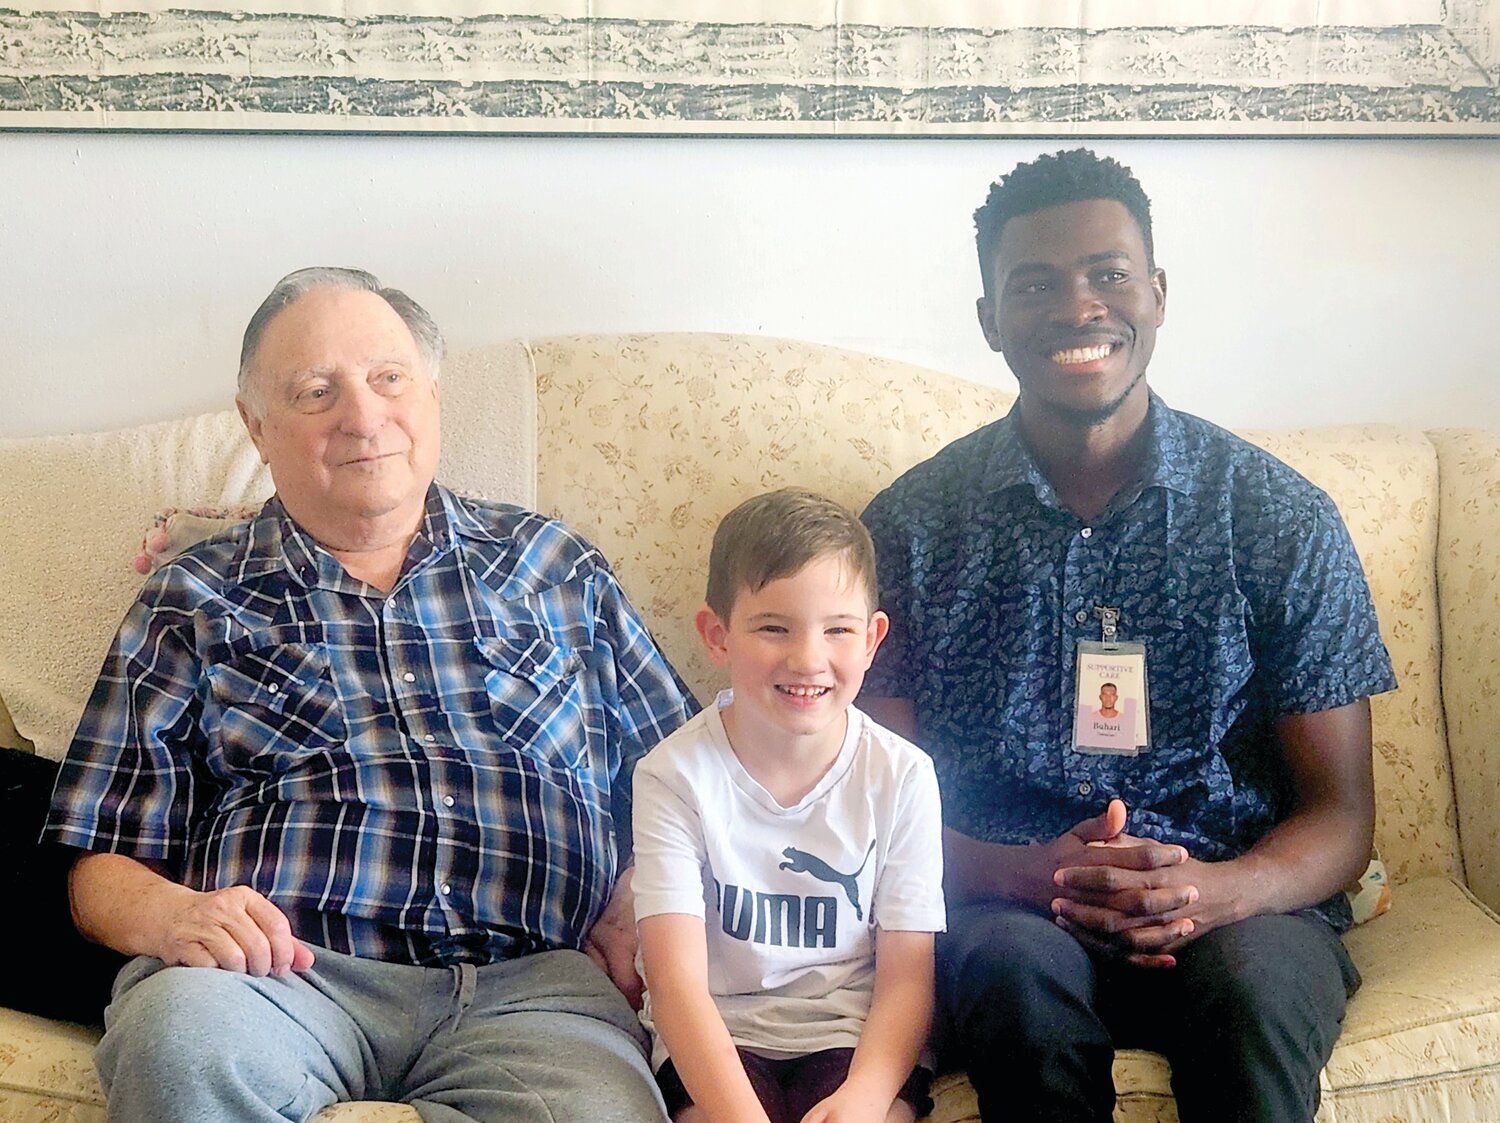 Volunteer Buhari Abdulai, right, enjoyed providing companionship to patient Bill Harris and his grandson, David. (Hospice of the Valley)